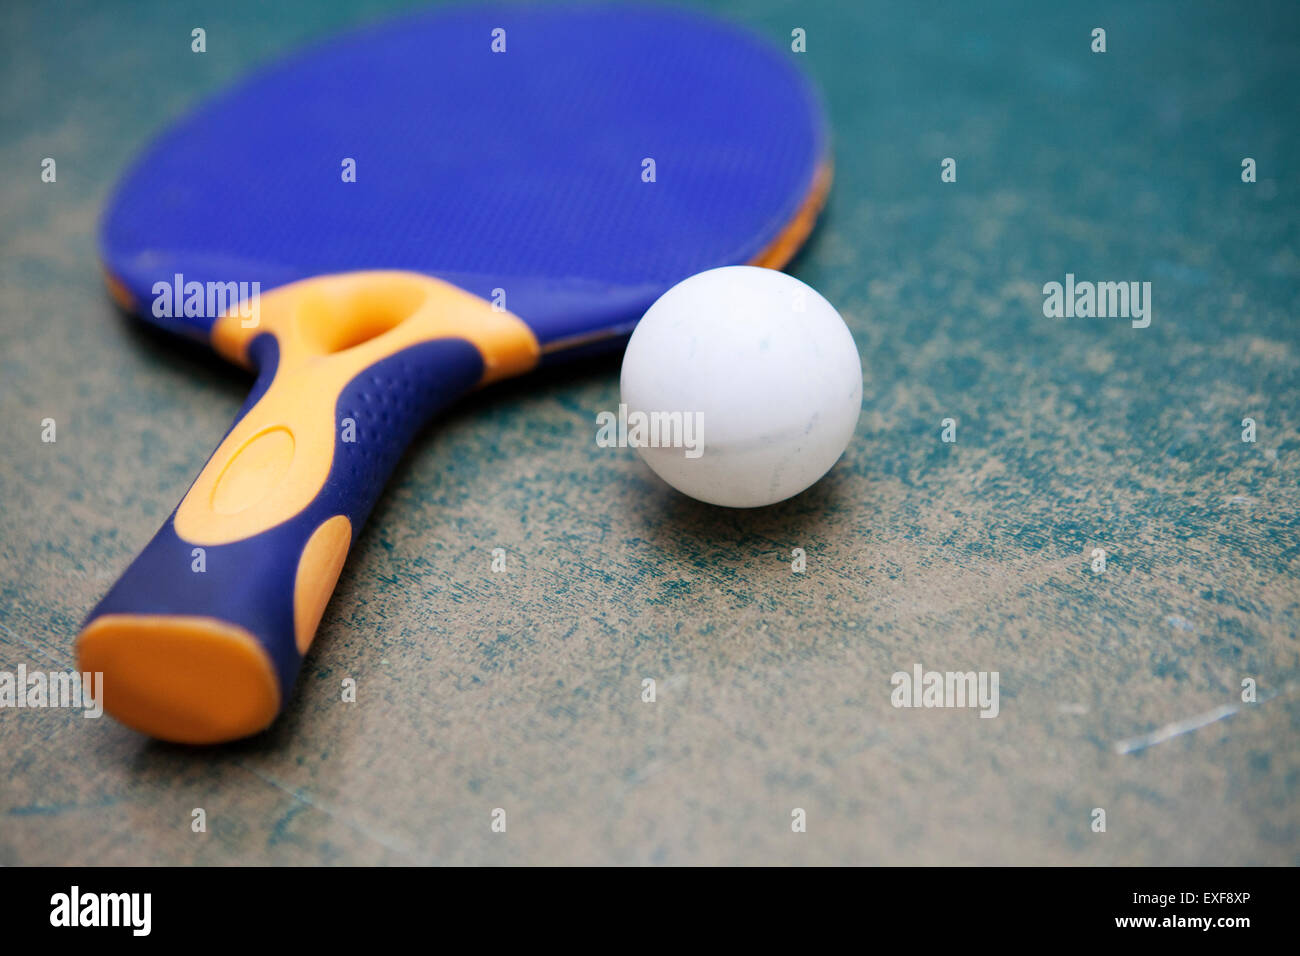 Table tennis paddle and ball on worn table Stock Photo